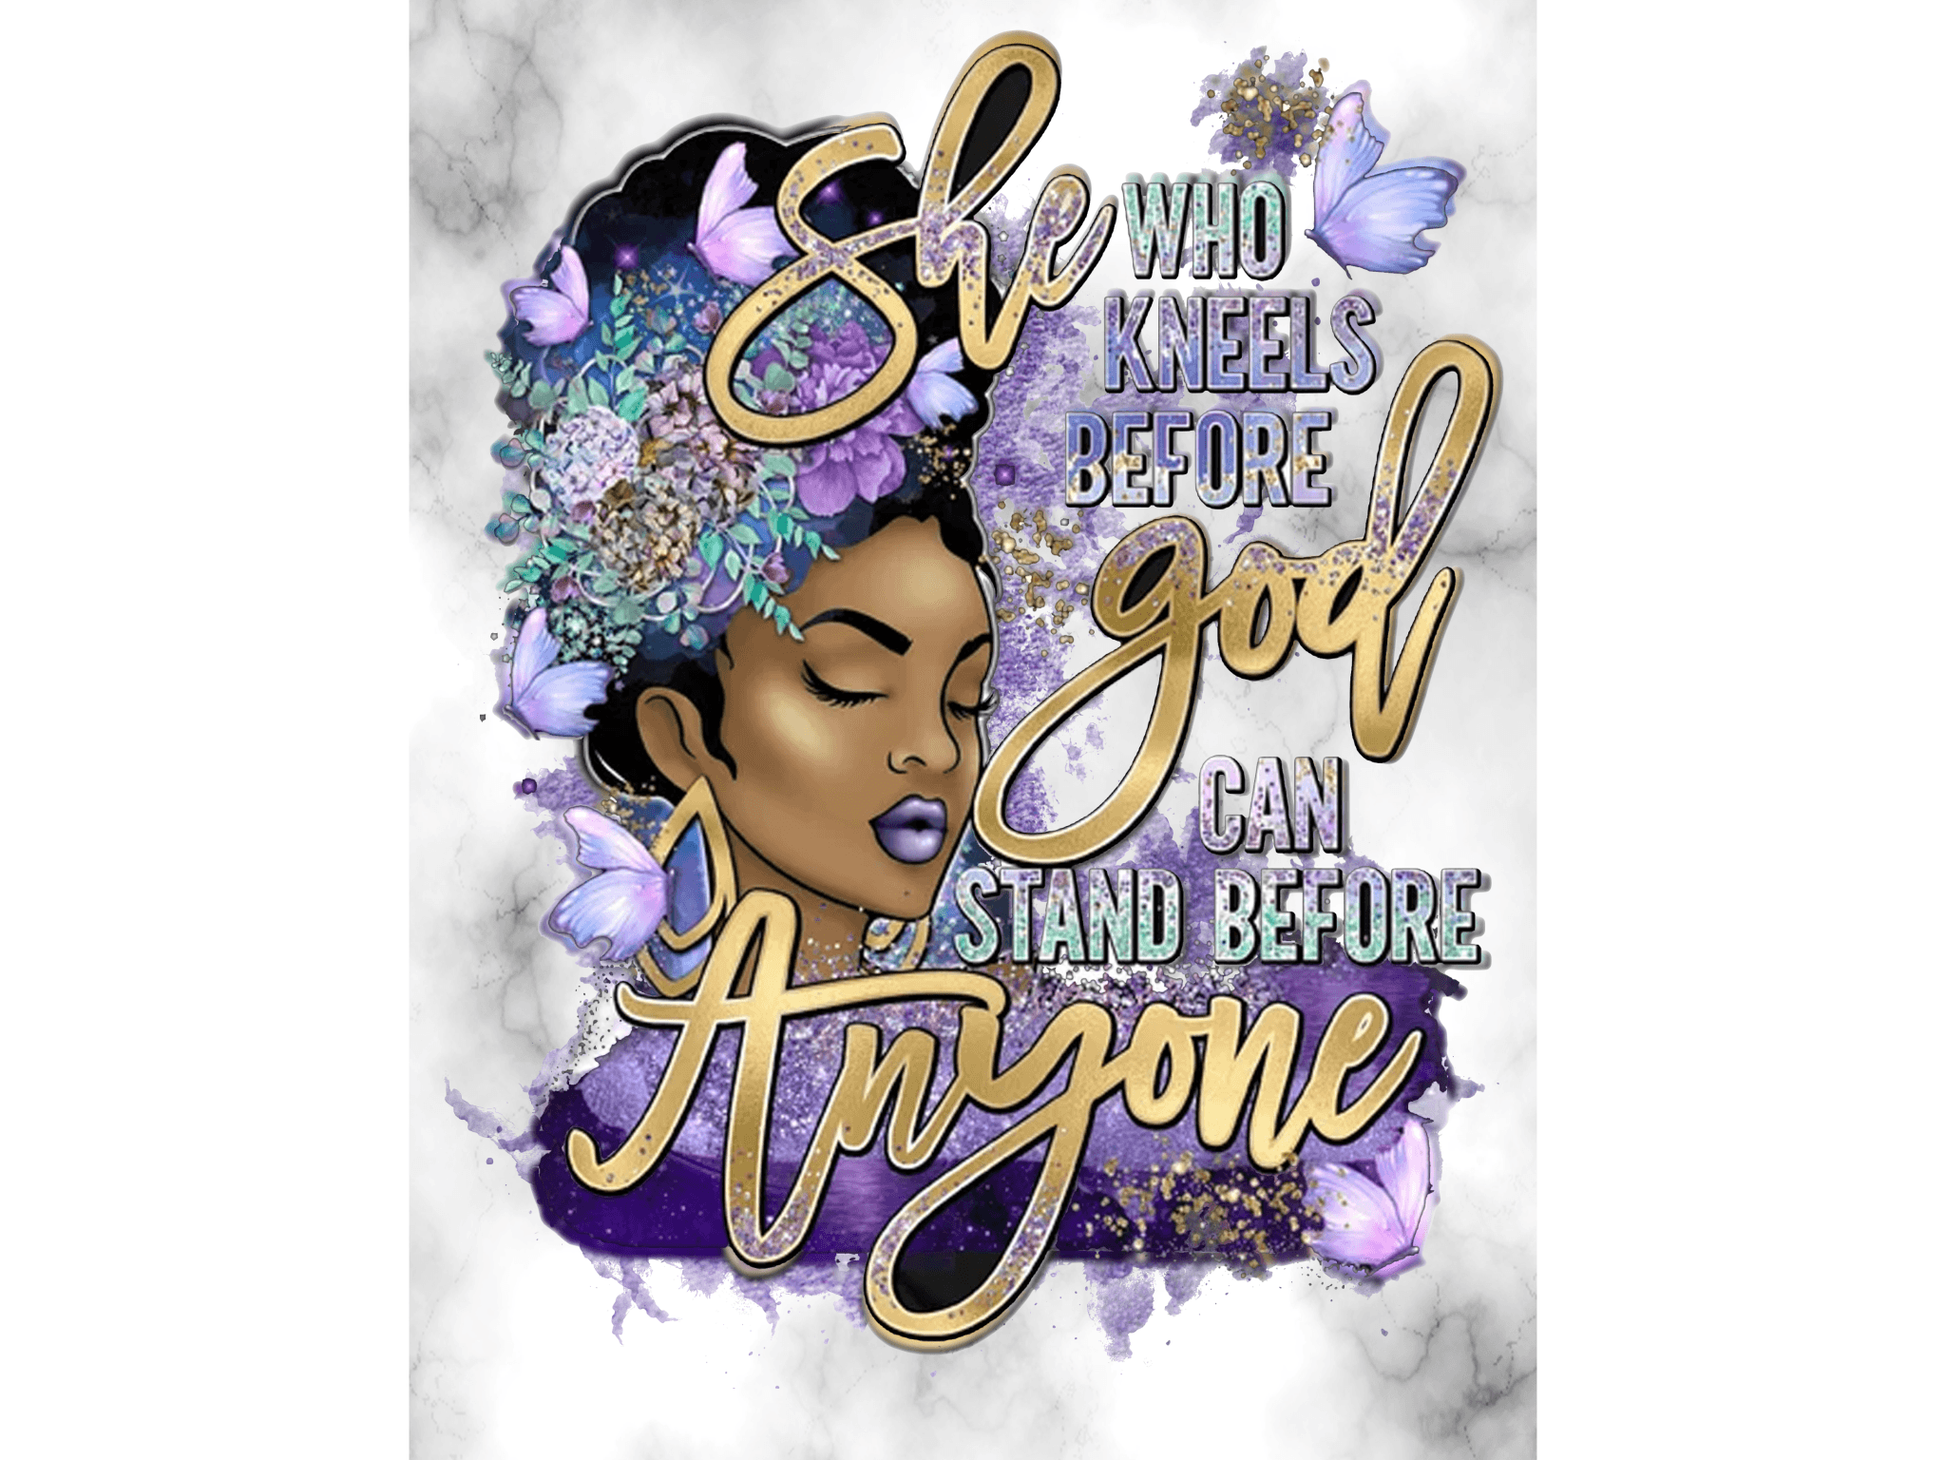 She who kneels before god can stand before anyone (Purple) - smuniqueshirts